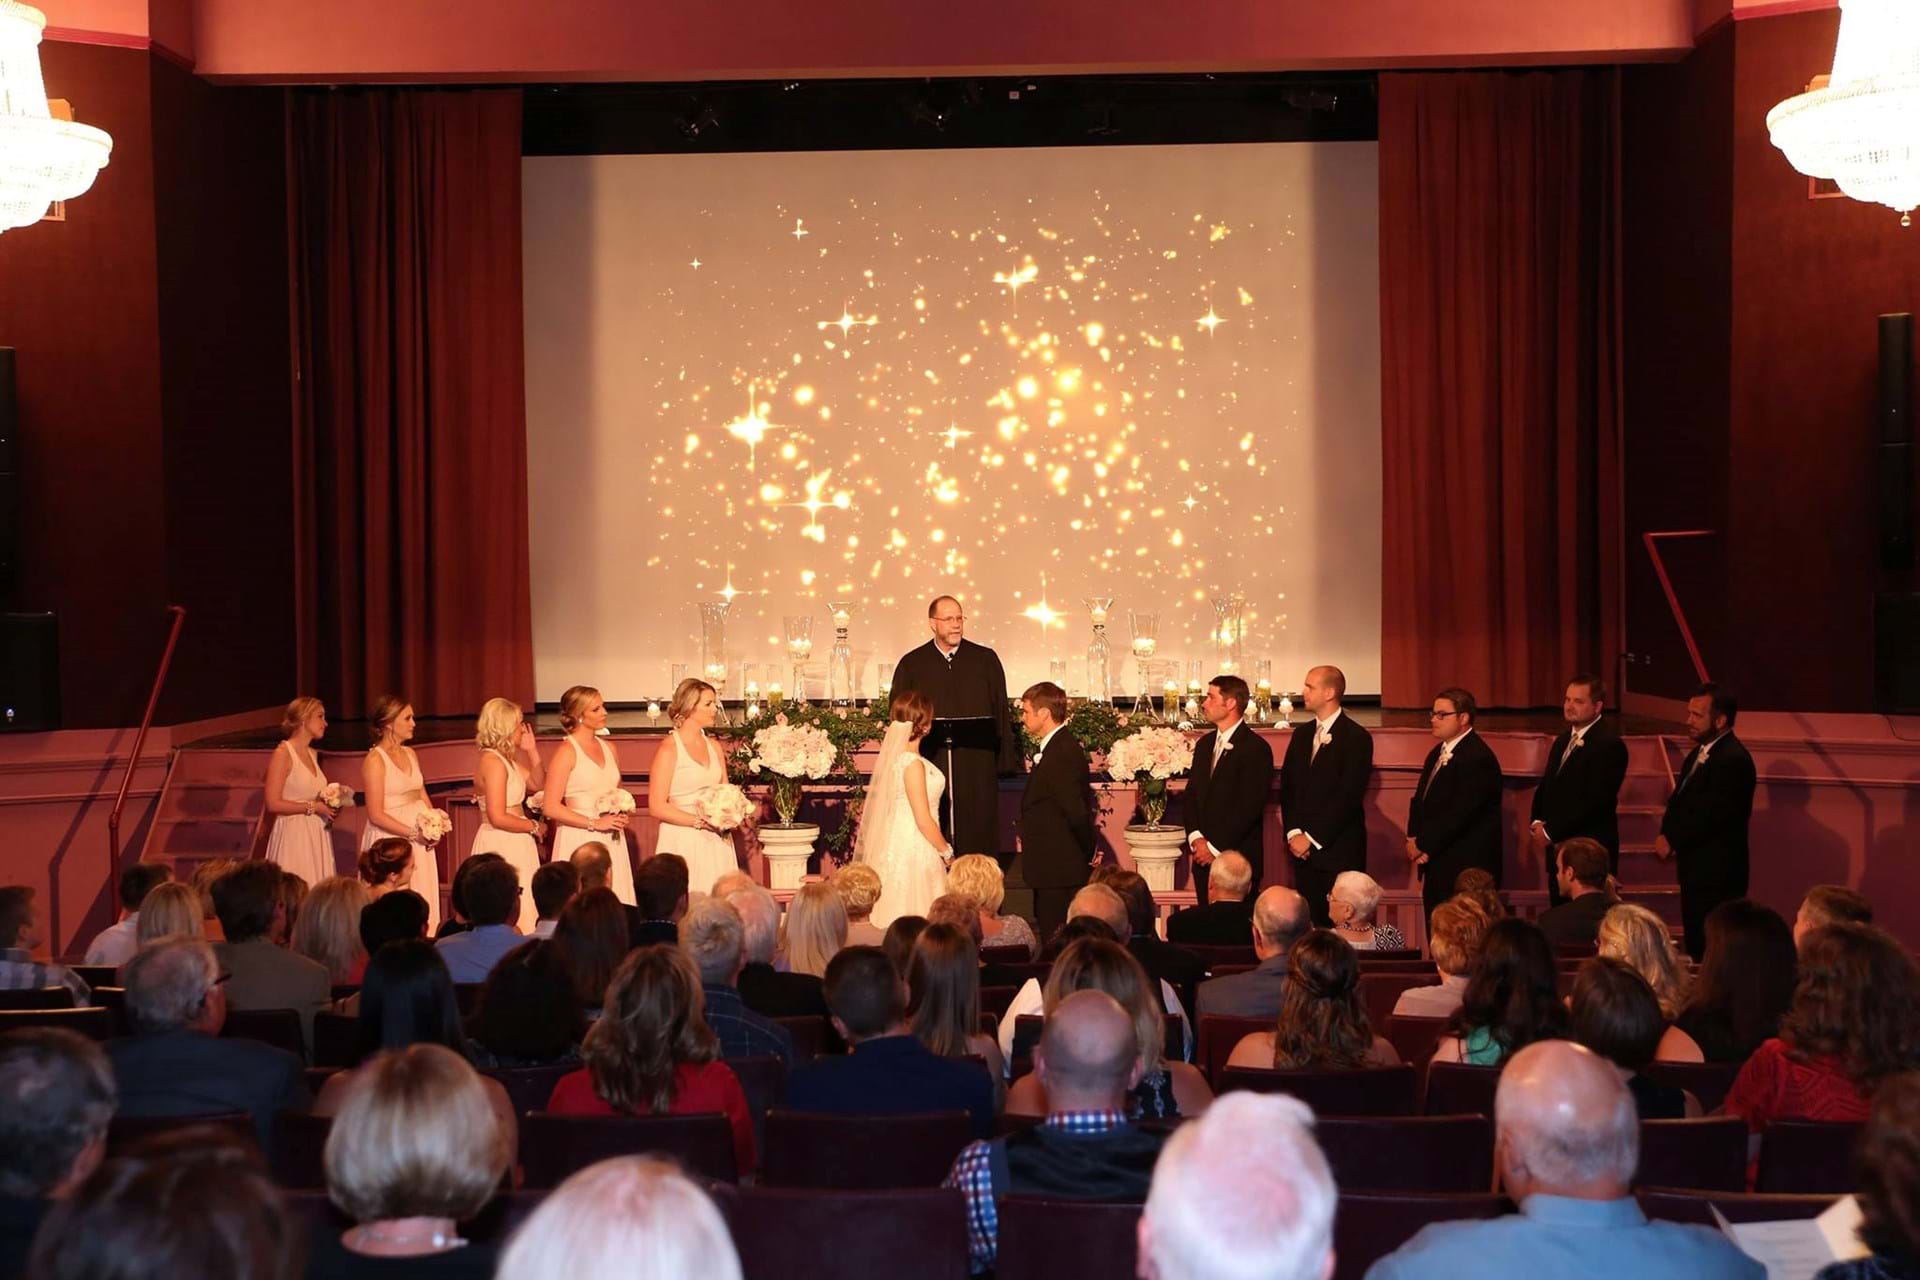 The historic movie theater at The Majestic Theater can be used for all types of events, including weddings.